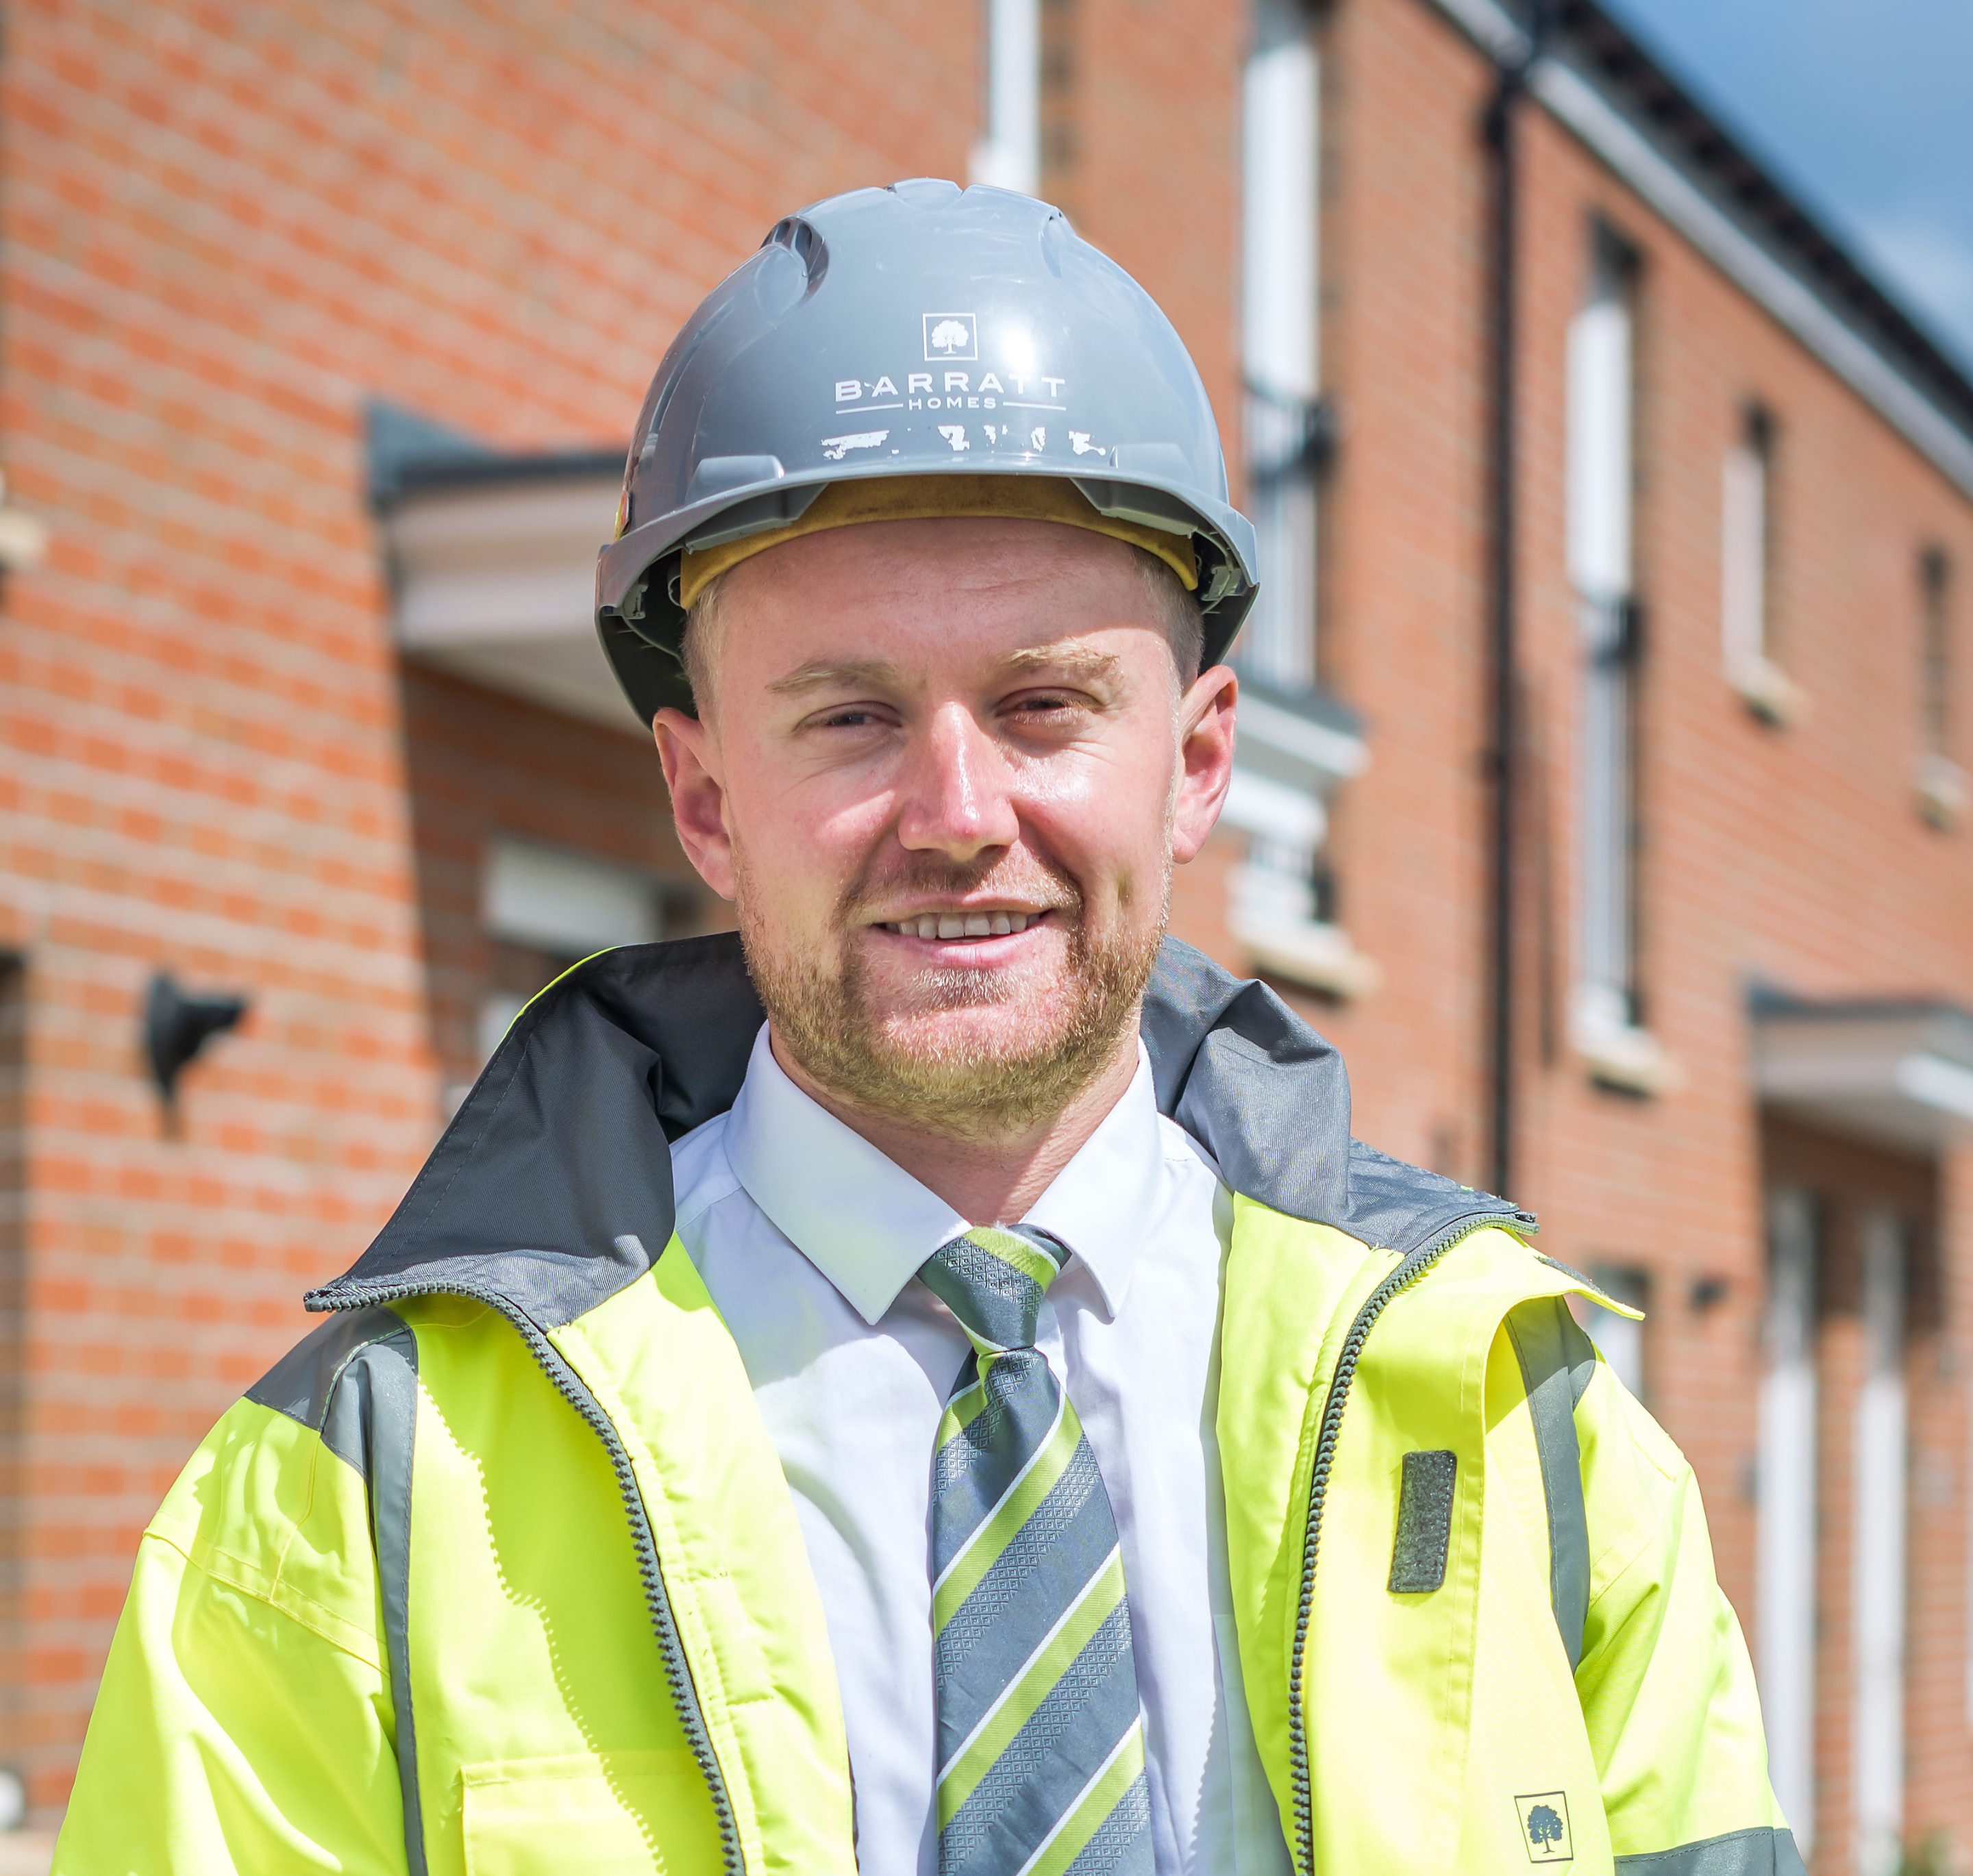 Site managers for Barratt Developments Scotland win top national awards for quality